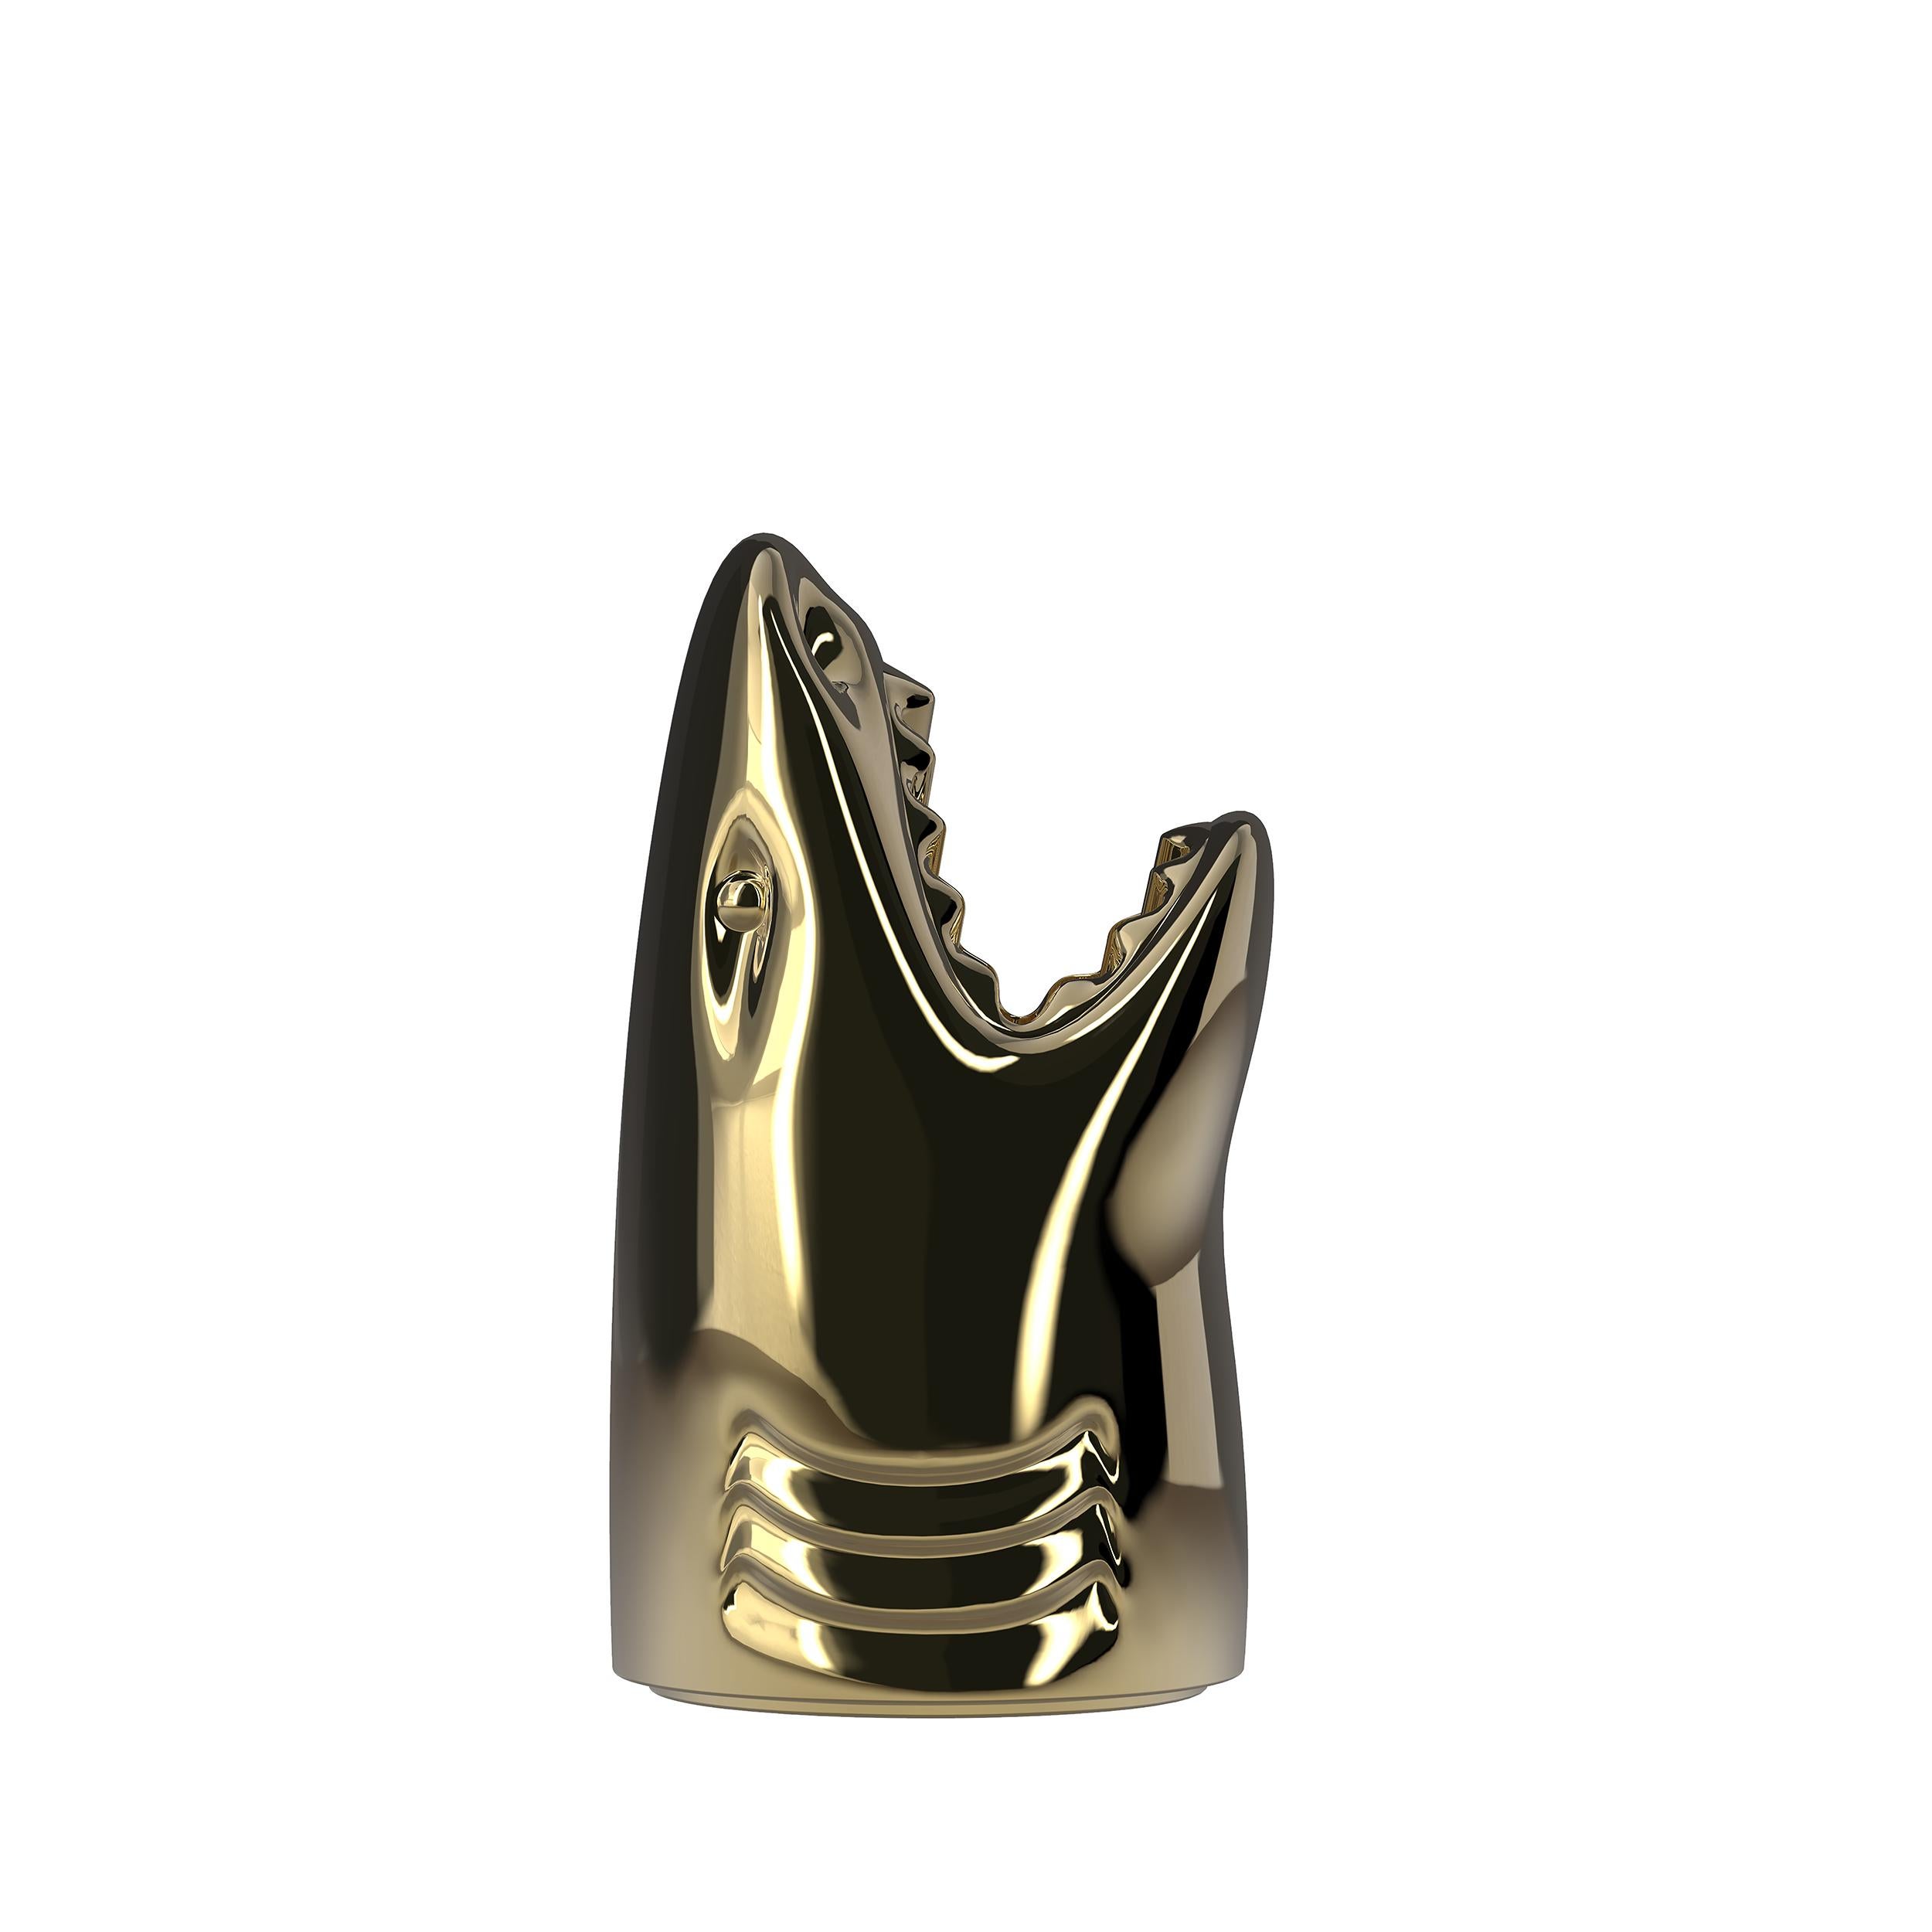 For Sale: Gold Modern Titanium Silver or Gold Shark Umbrella Stand or Champagne Cooler